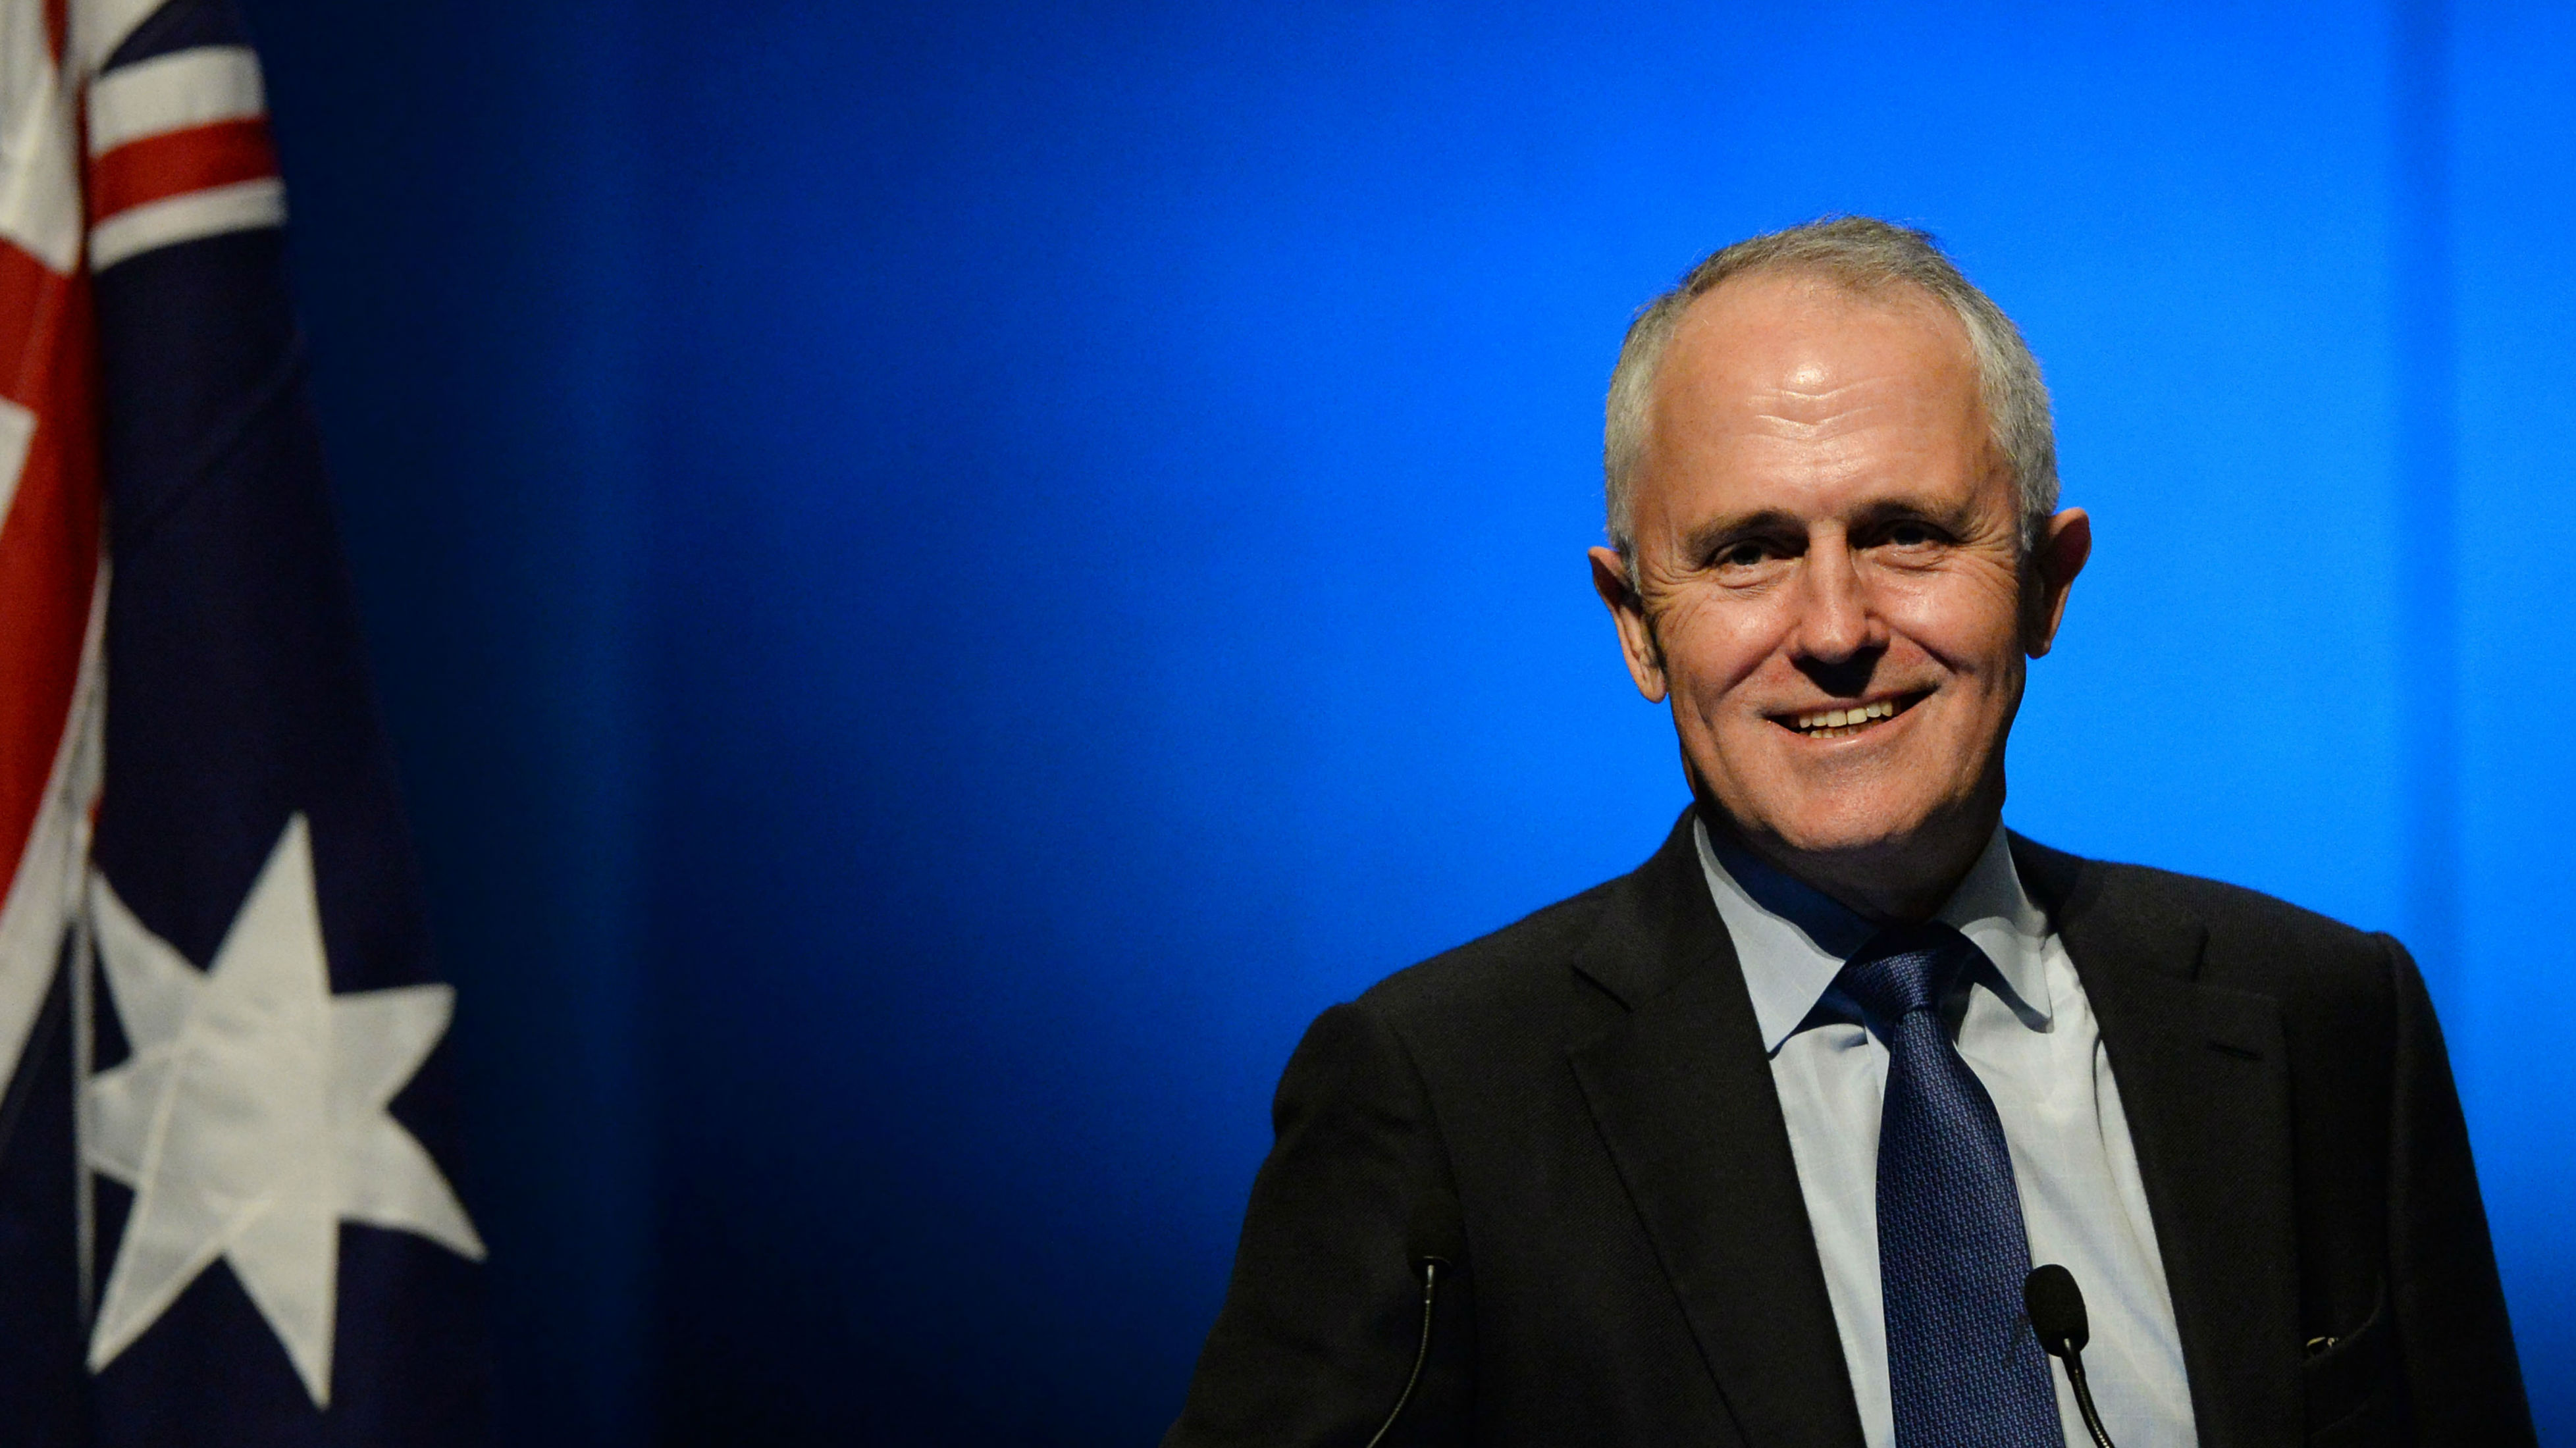 Who is Malcolm Turnbull? The demographics of Australian Prime Ministers